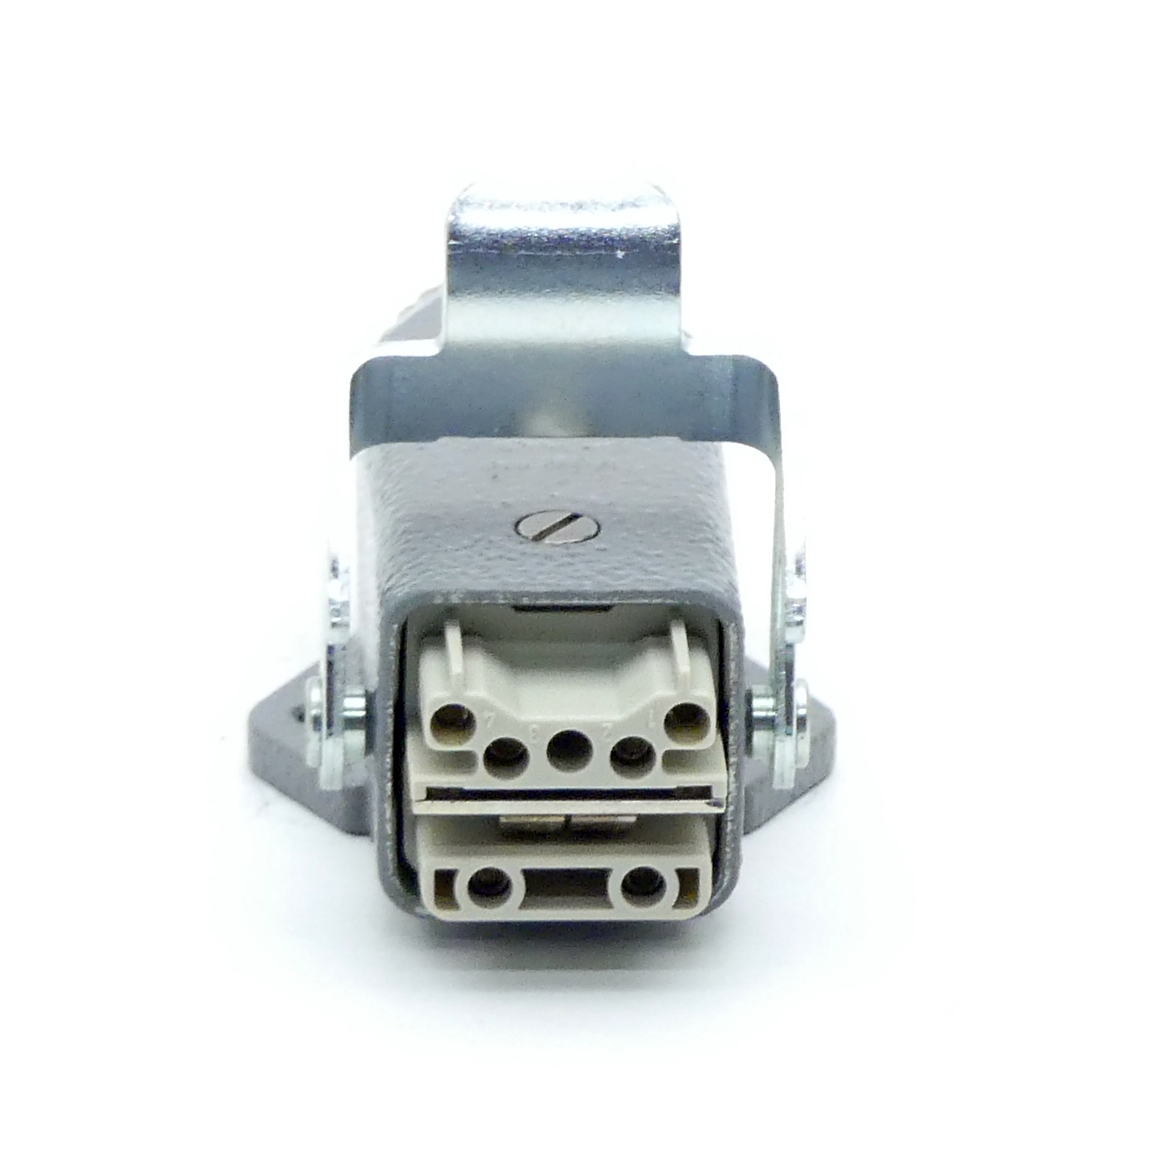 System interface connector Cube67 